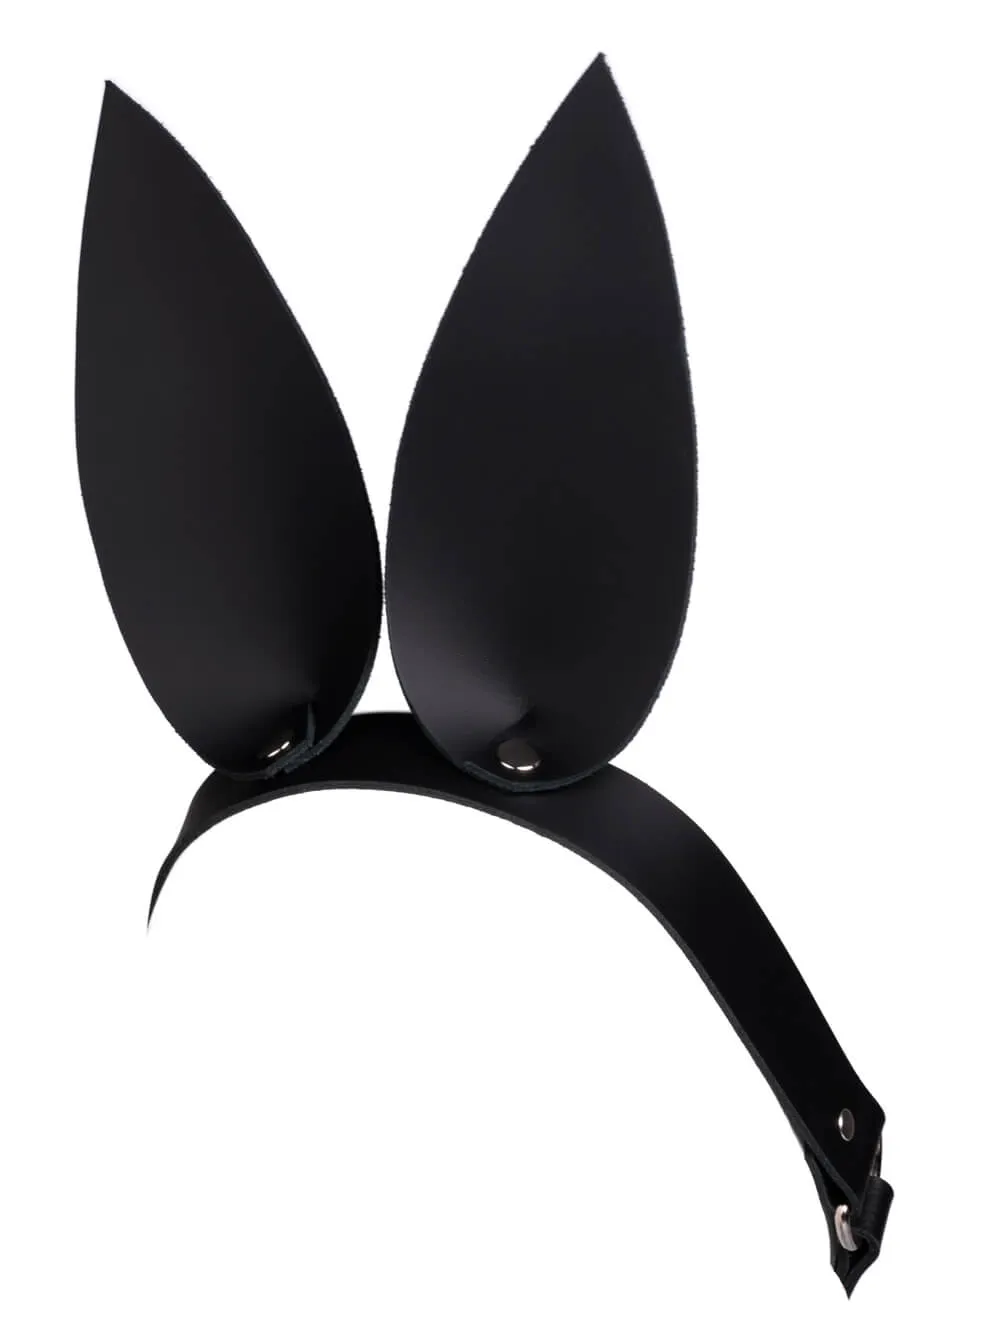 Sexy black leather tiara with rabbit ears. Halloween, BDSM and party carnival costume.